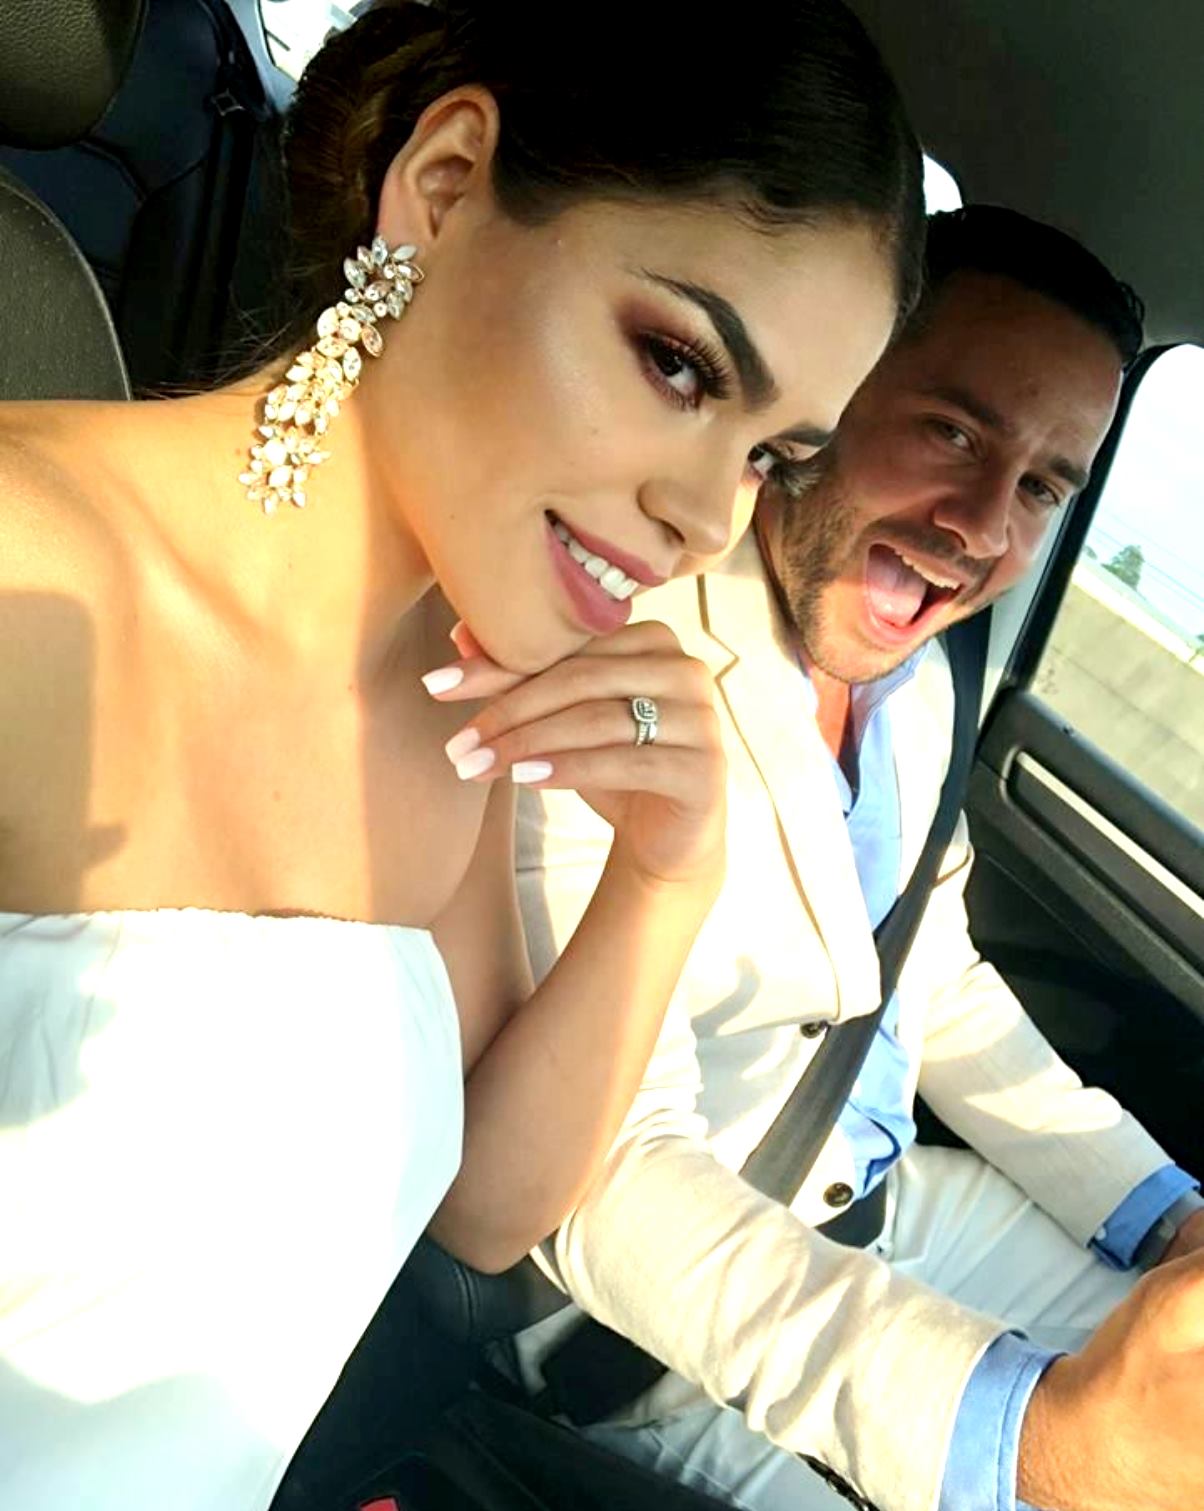 90 Day Fiance UPDATE Are Fernanda & Jonathan Still Together? Find out